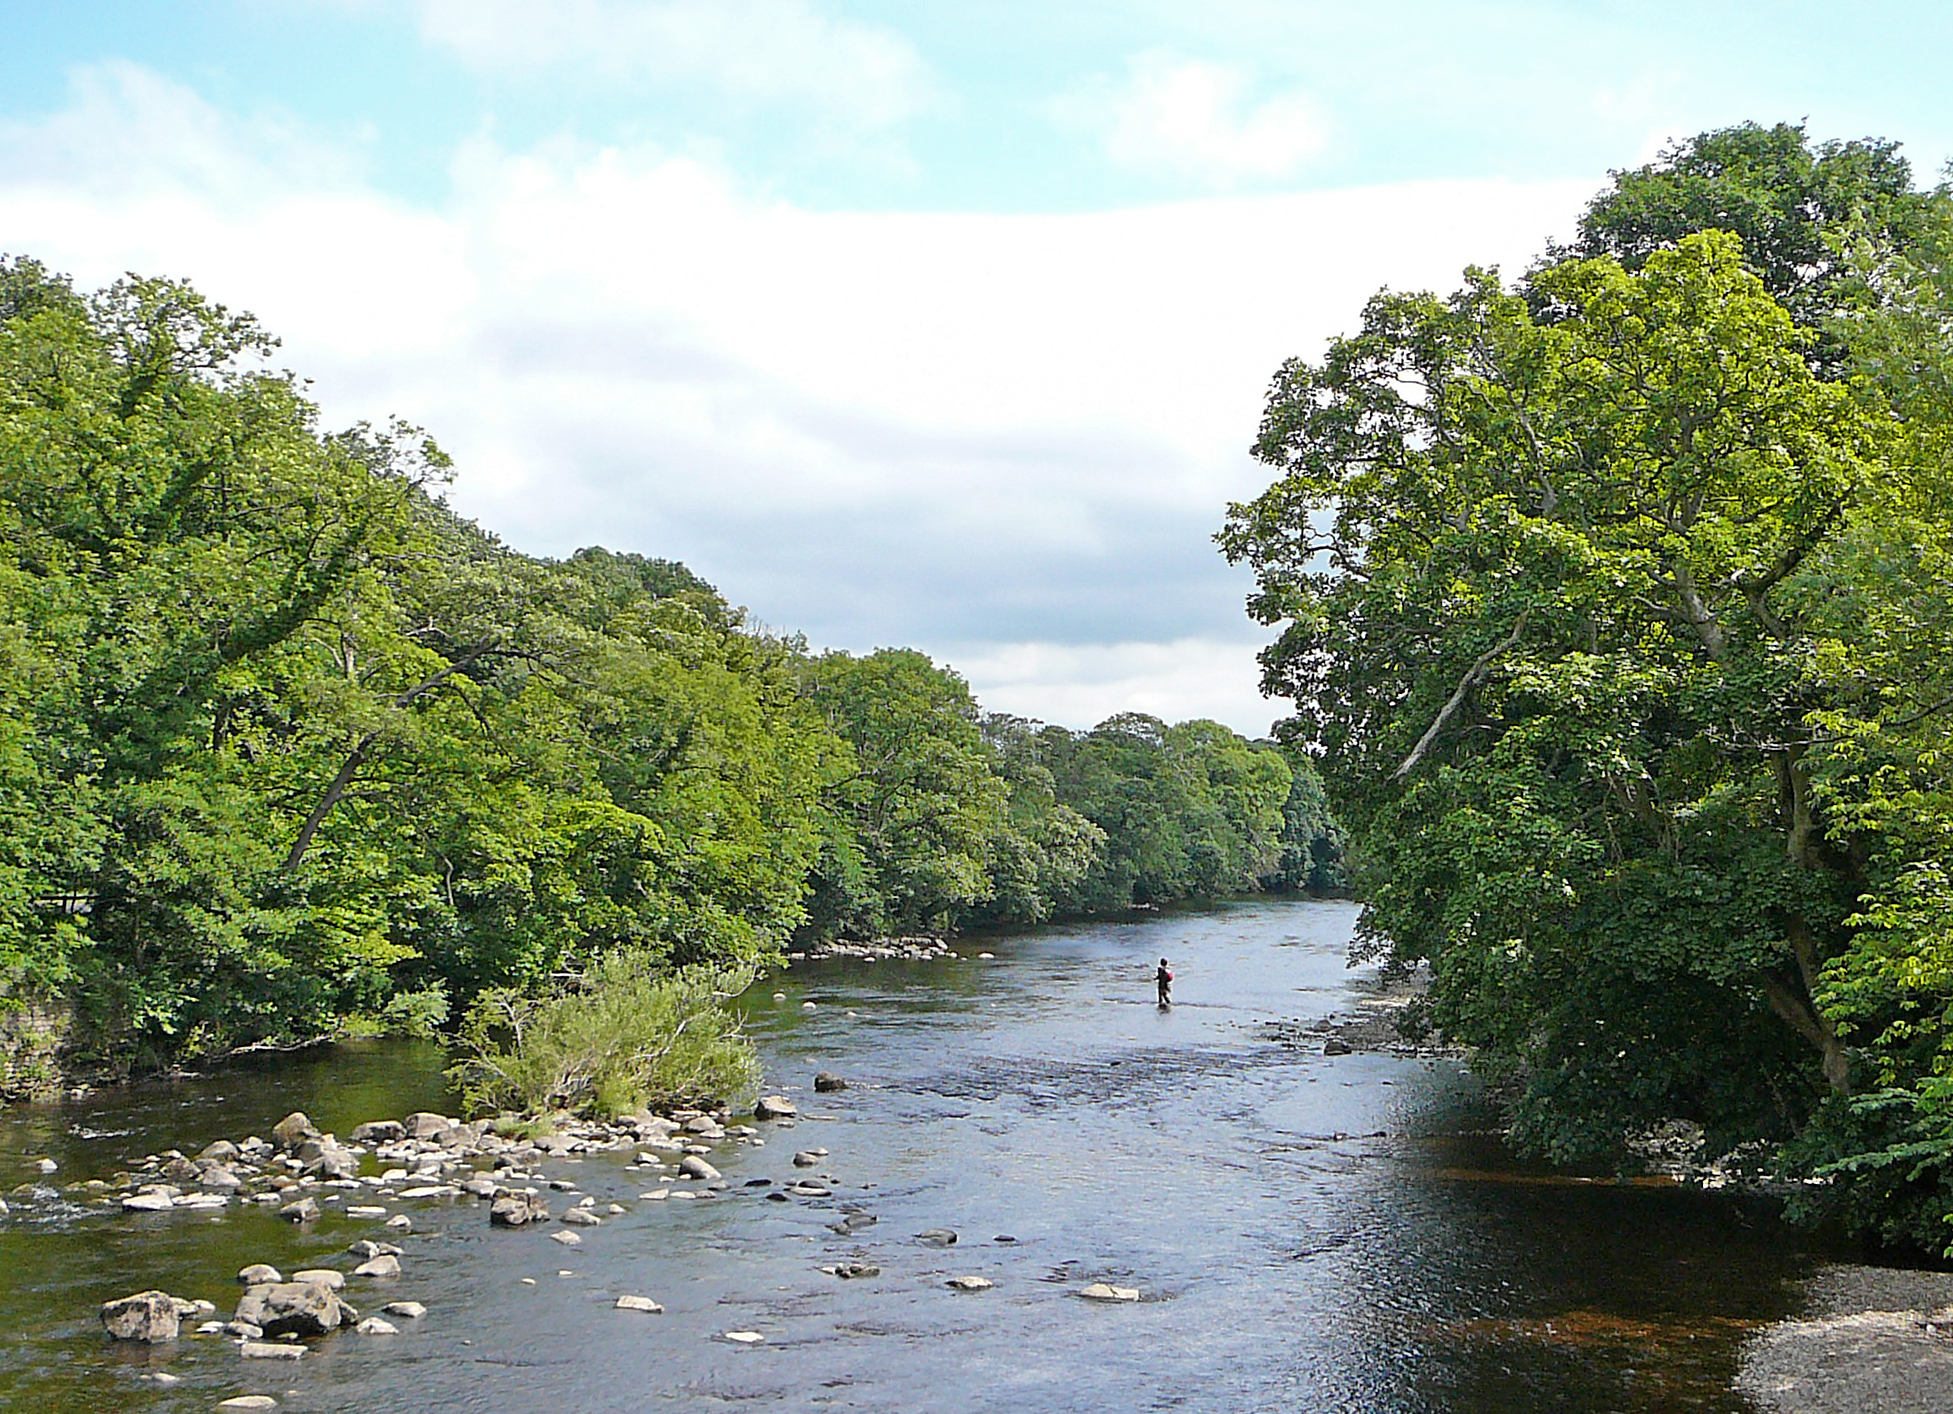 a person is floating down a river near many trees